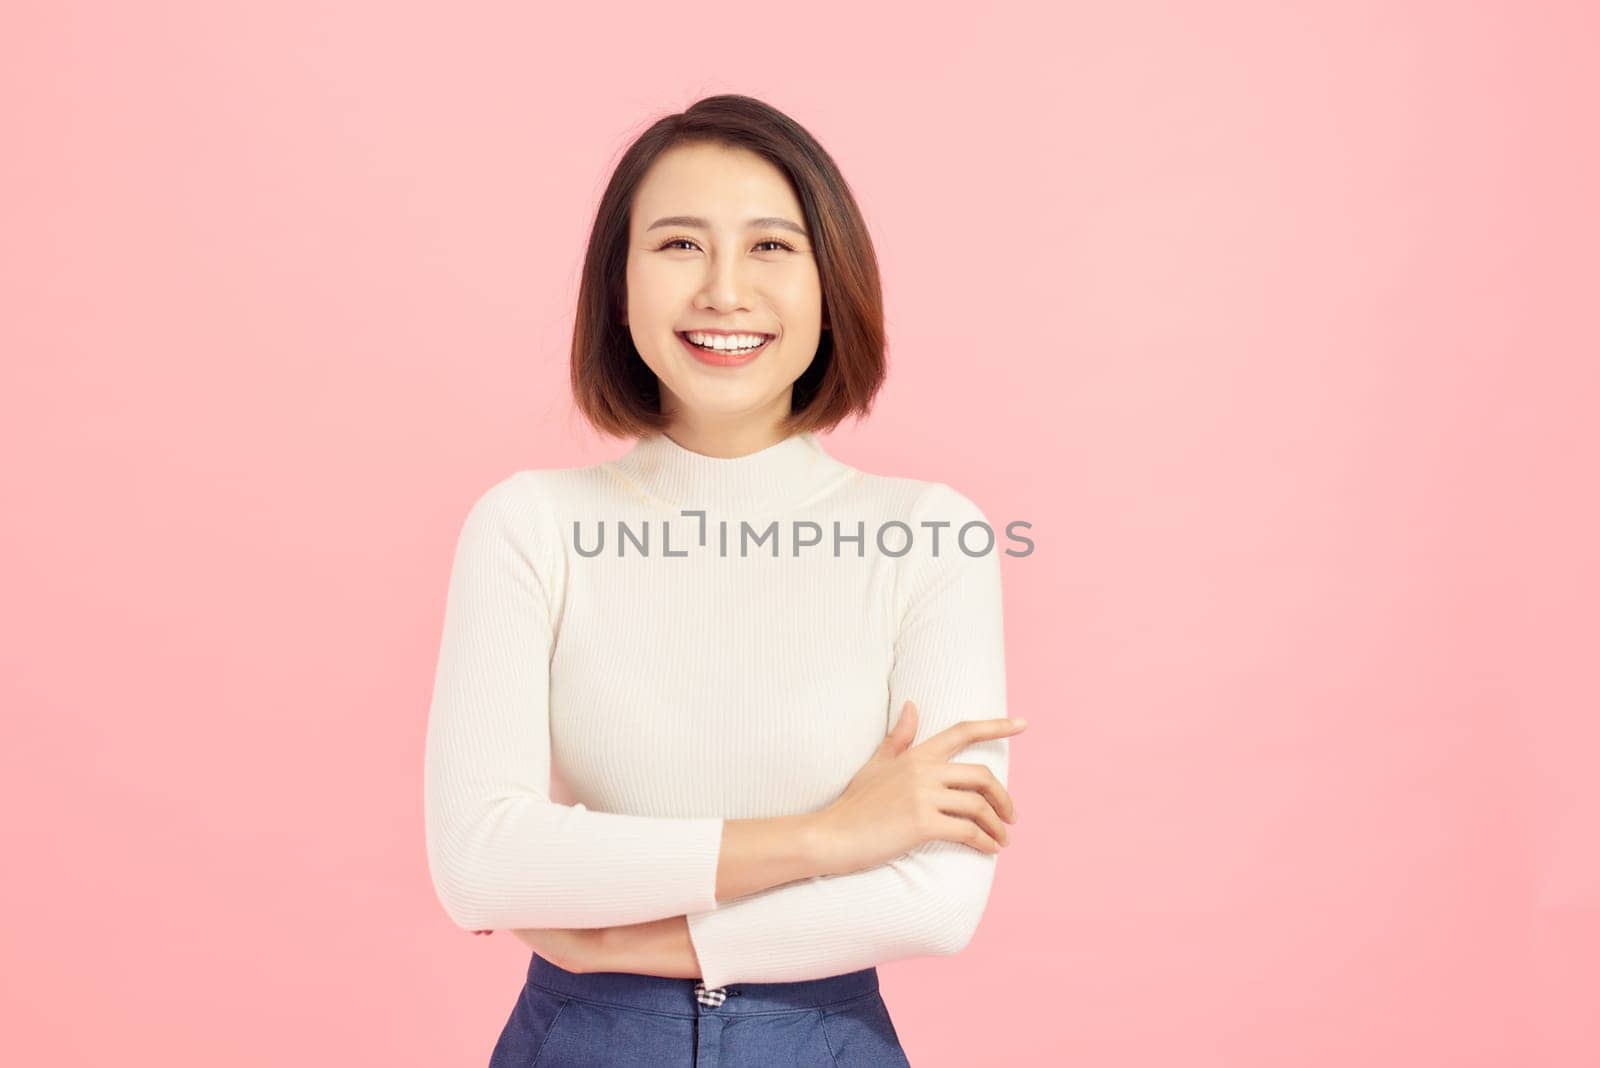 Young Asian woman wearing  sweater standing over isolated pink background happy face smiling with crossed arms looking at the camera. Positive person.